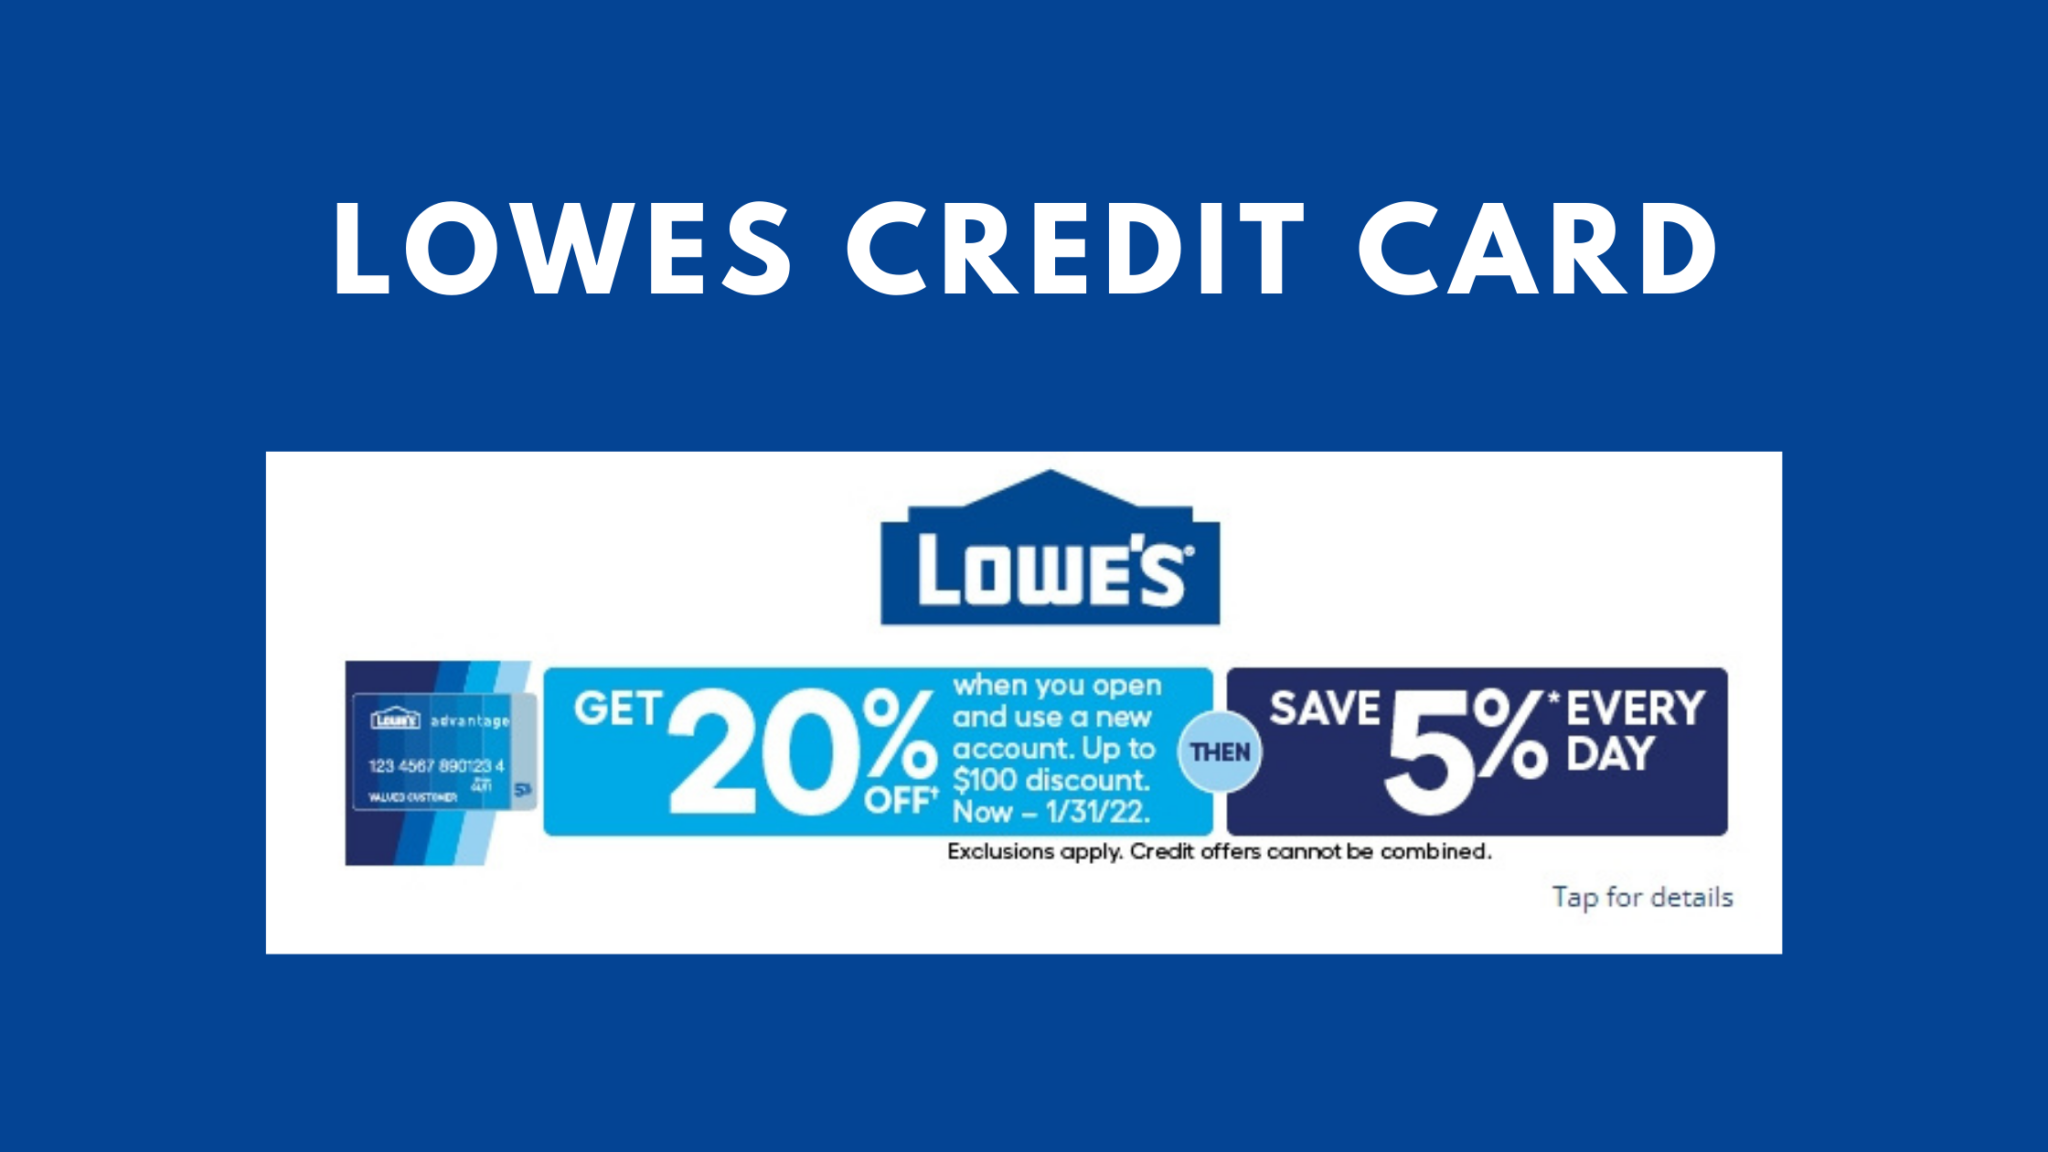 lowes-credit-card-apply-manage-online